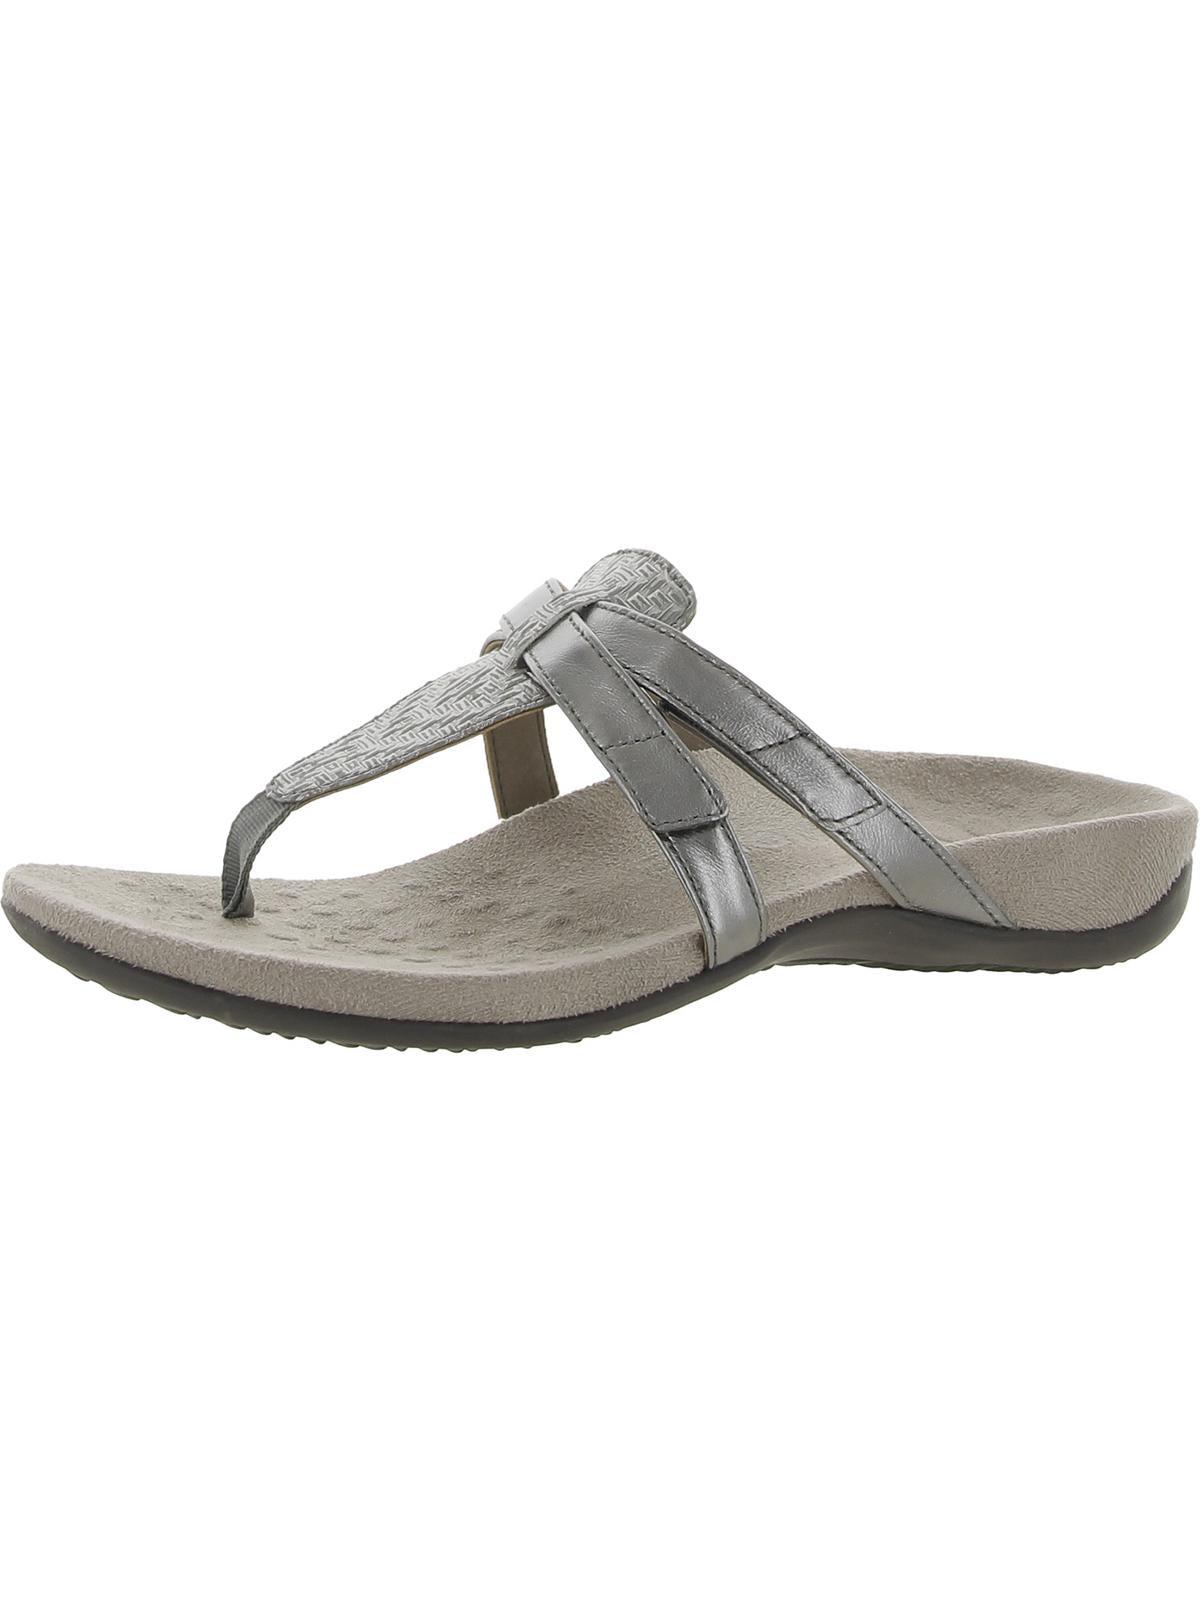 Vionic Karley Leather Thong Slide Sandals in Gray | Lyst